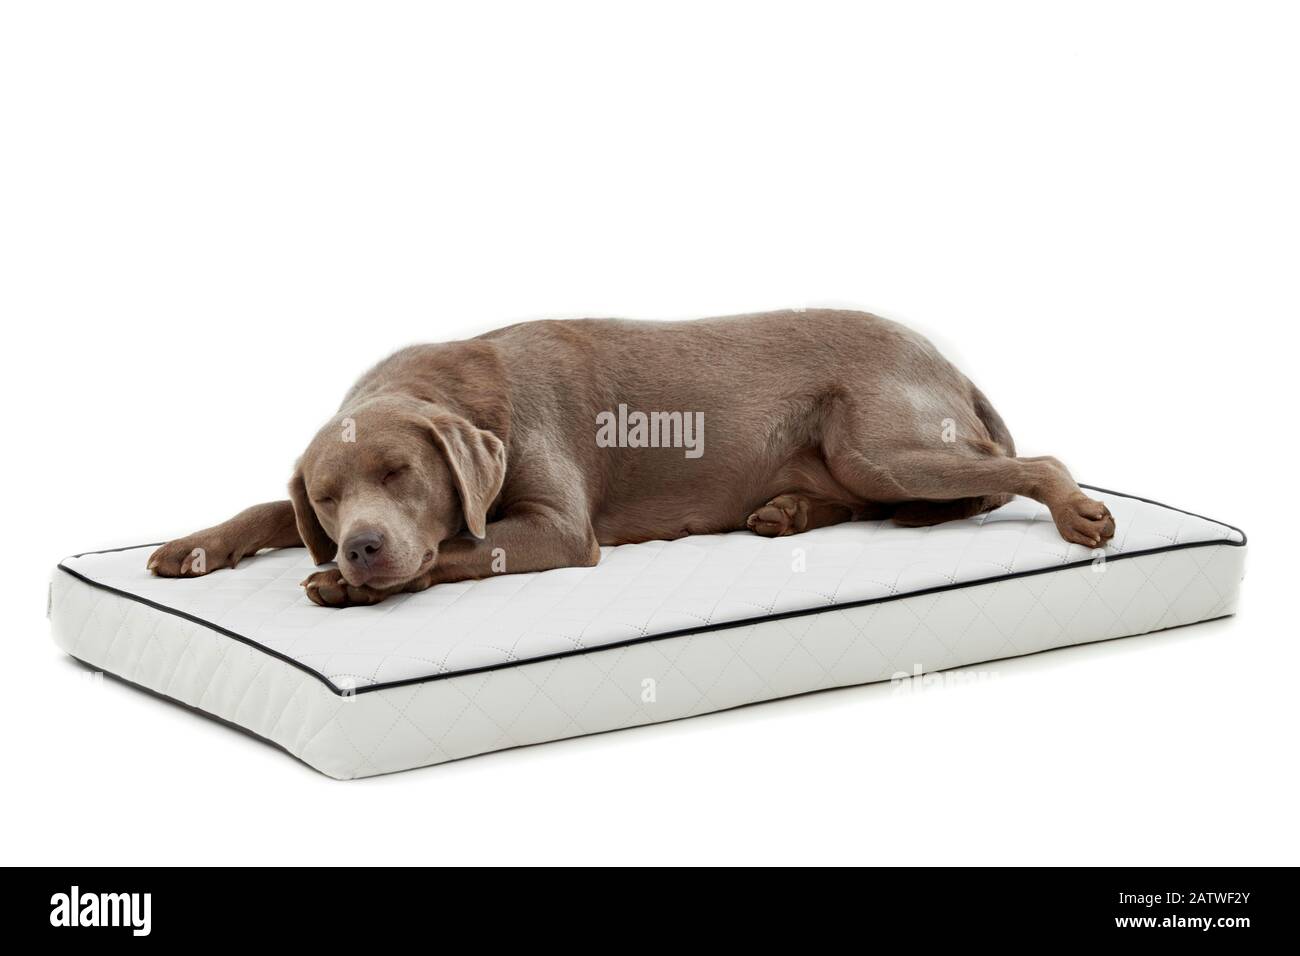 Labrador Retriever sleeping on a pet bed. Studio picture against a white background. Germany. Stock Photo